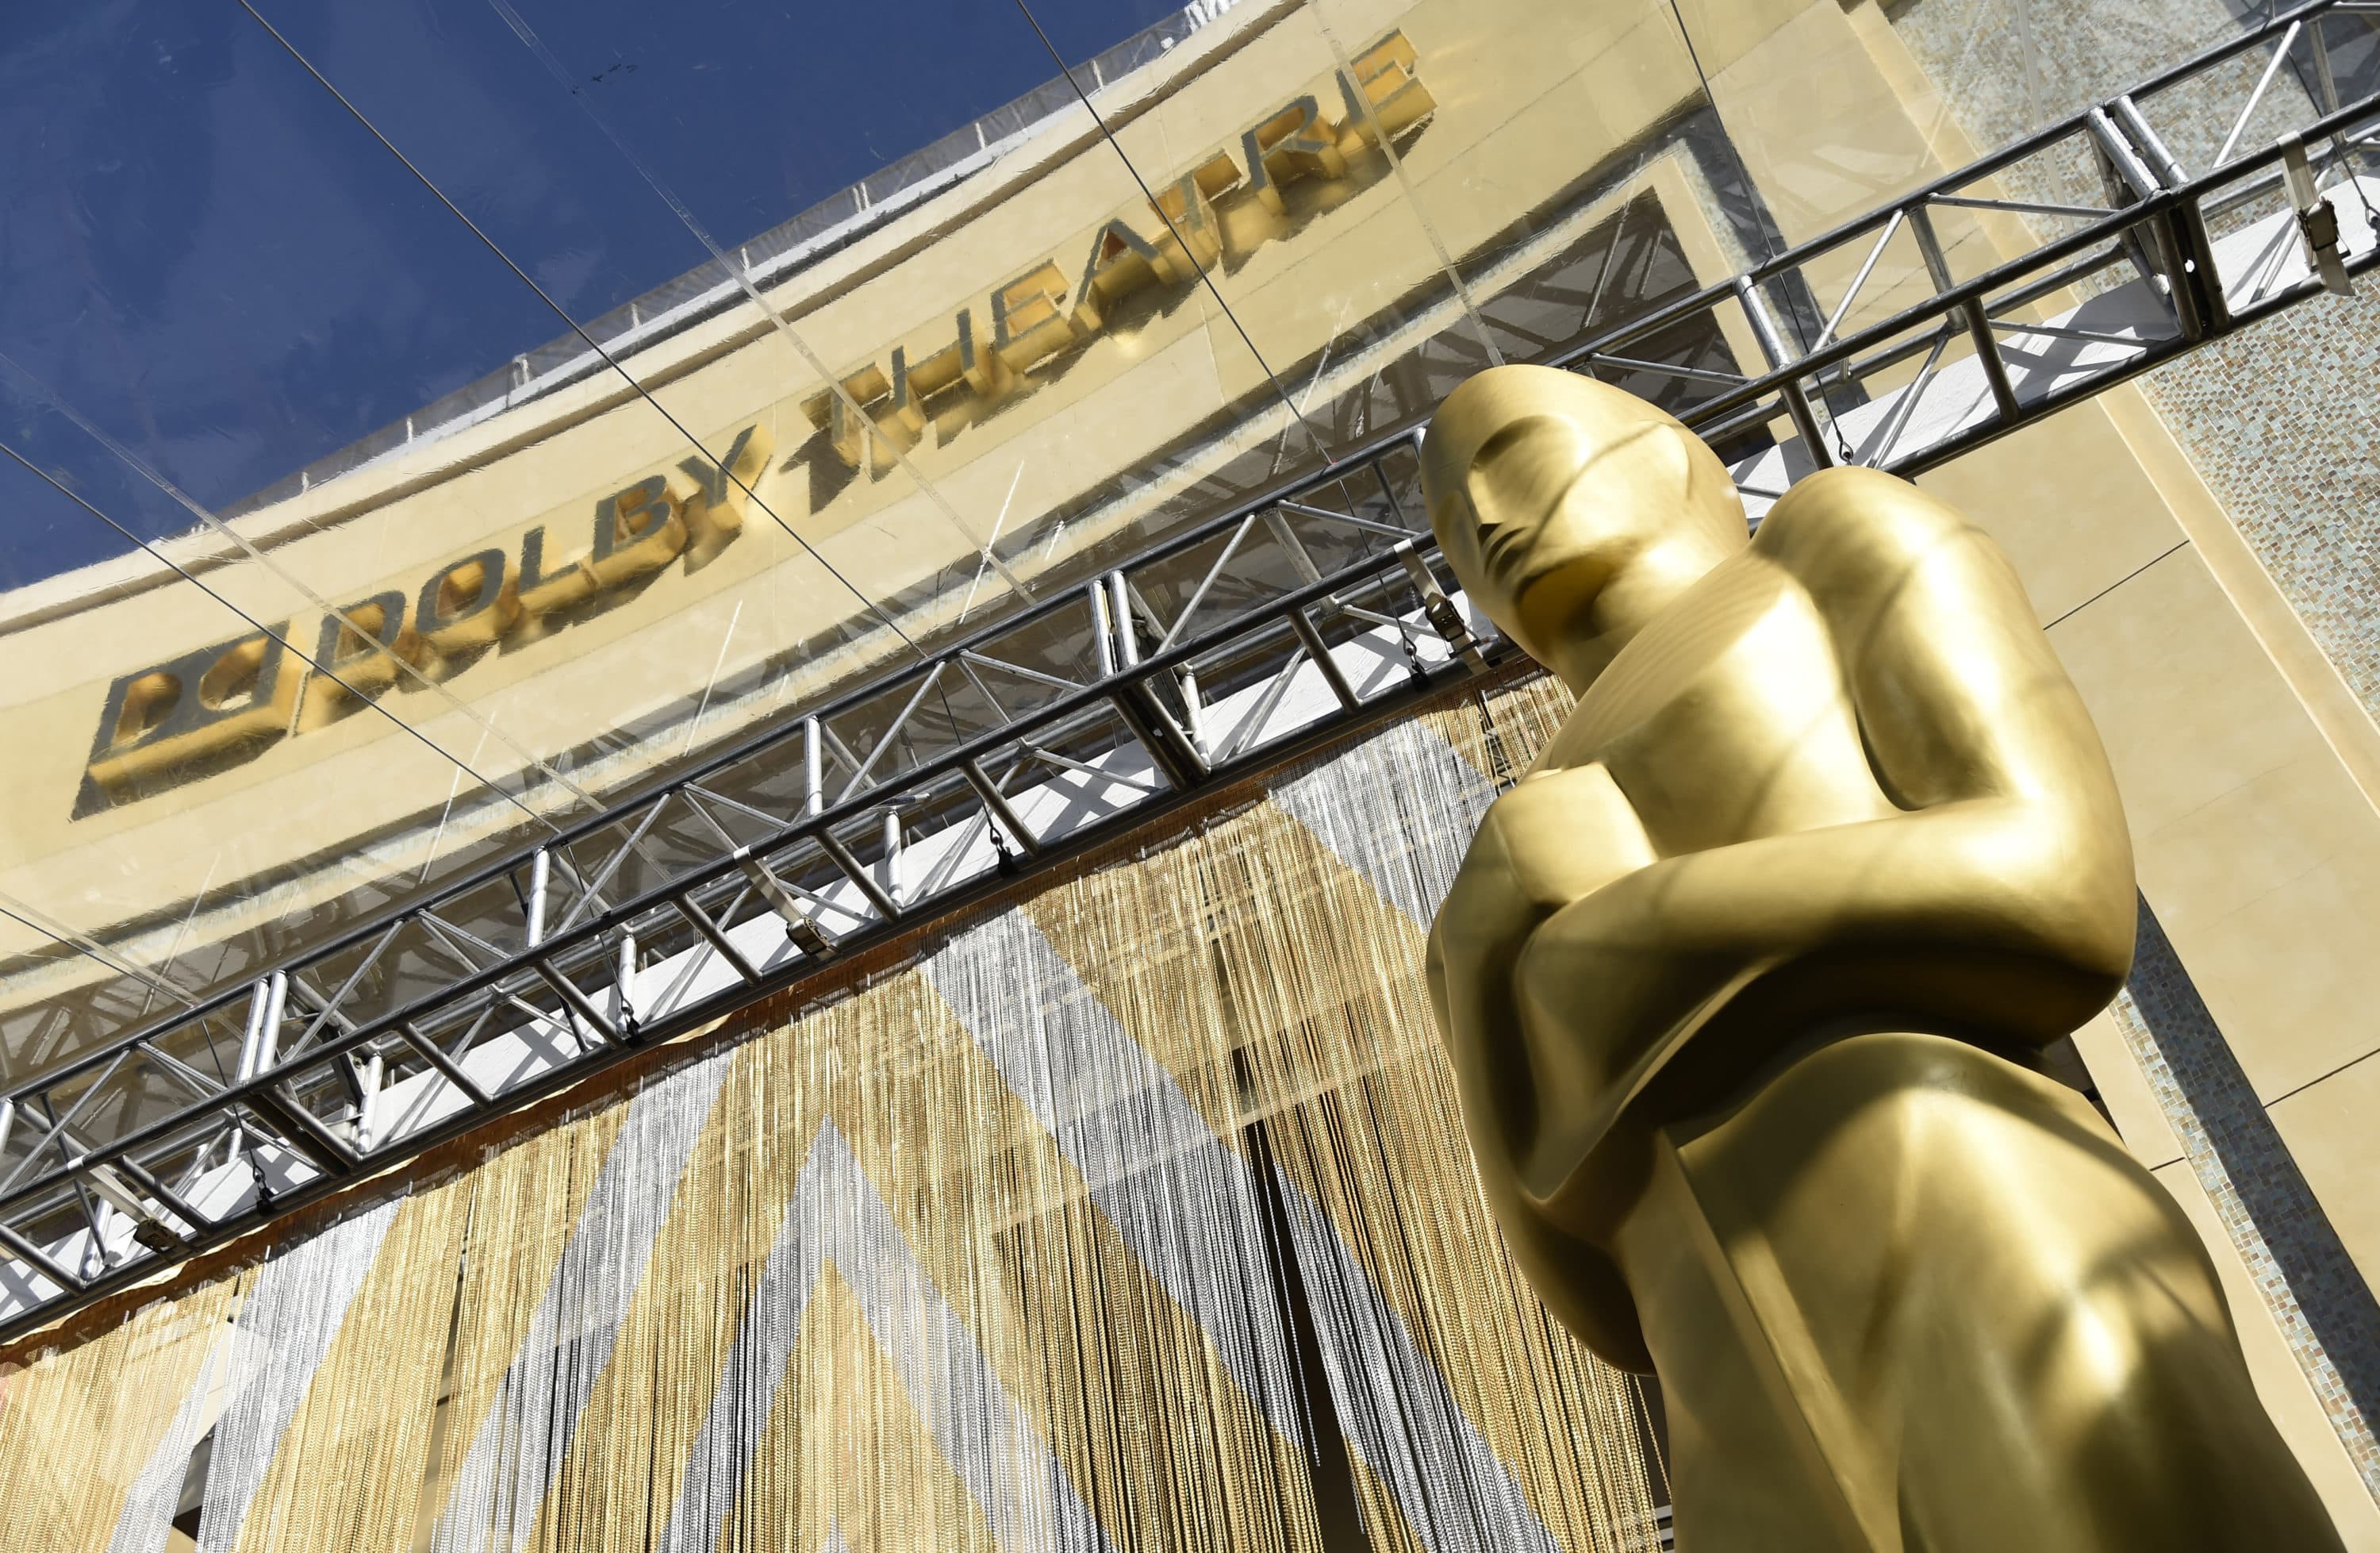 An Oscar statue is pictured underneath the entrance to the Dolby Theatre on Feb. 24, 2016, in Los Angeles. The Oscars will be held on Sunday, March 27 at the Dolby Theatre in Los Angeles. The ceremony is set to begin at 8 p.m. ET and will be broadcast live on ABC. (Chris Pizzello/Invision/AP)